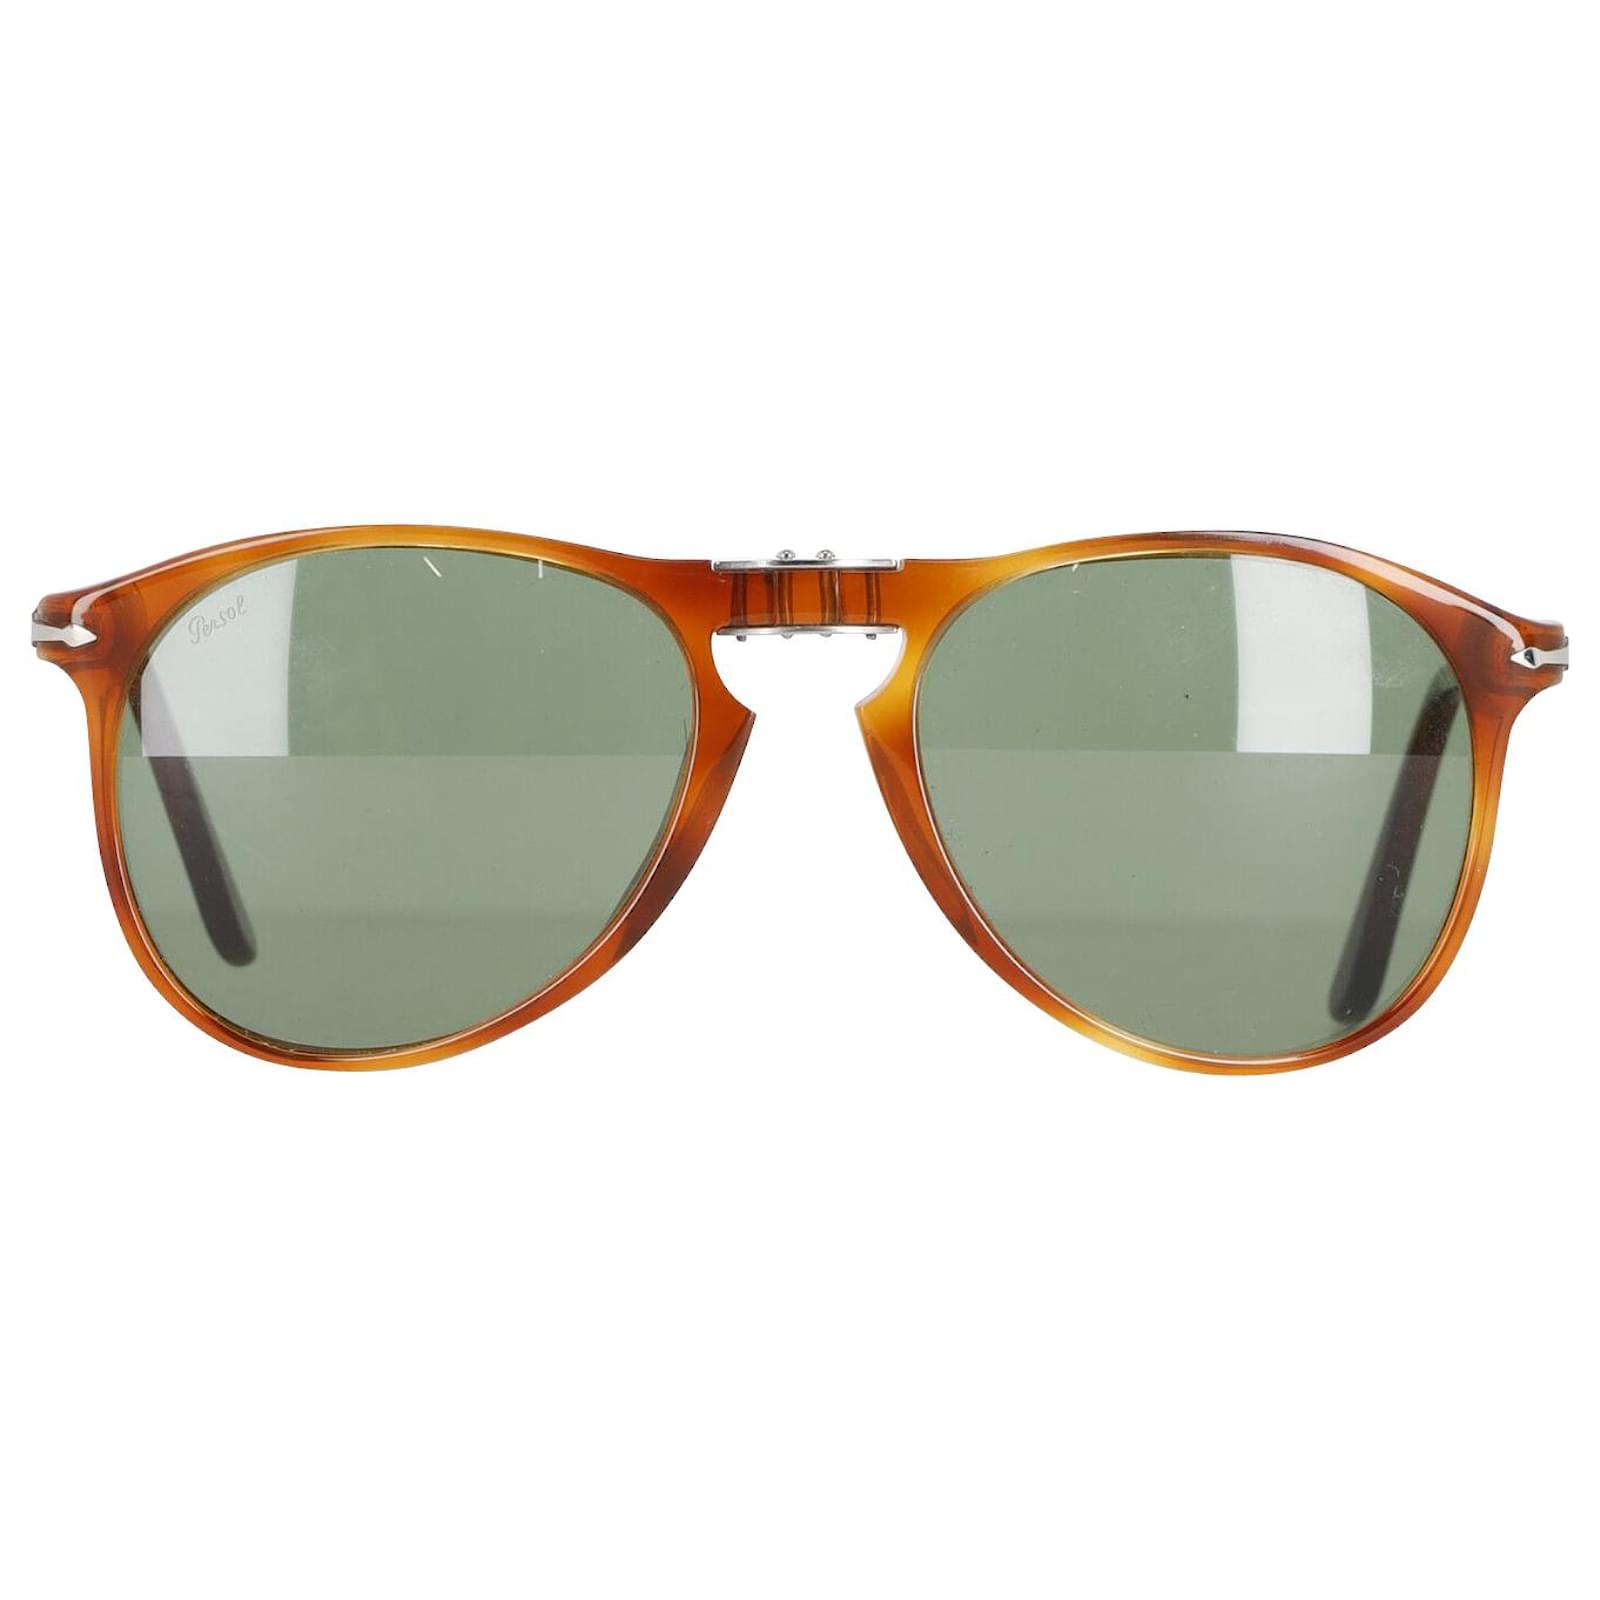 The Persol Sunglasses Steve McQueen Made Famous Are a Whopping Half Off | GQ